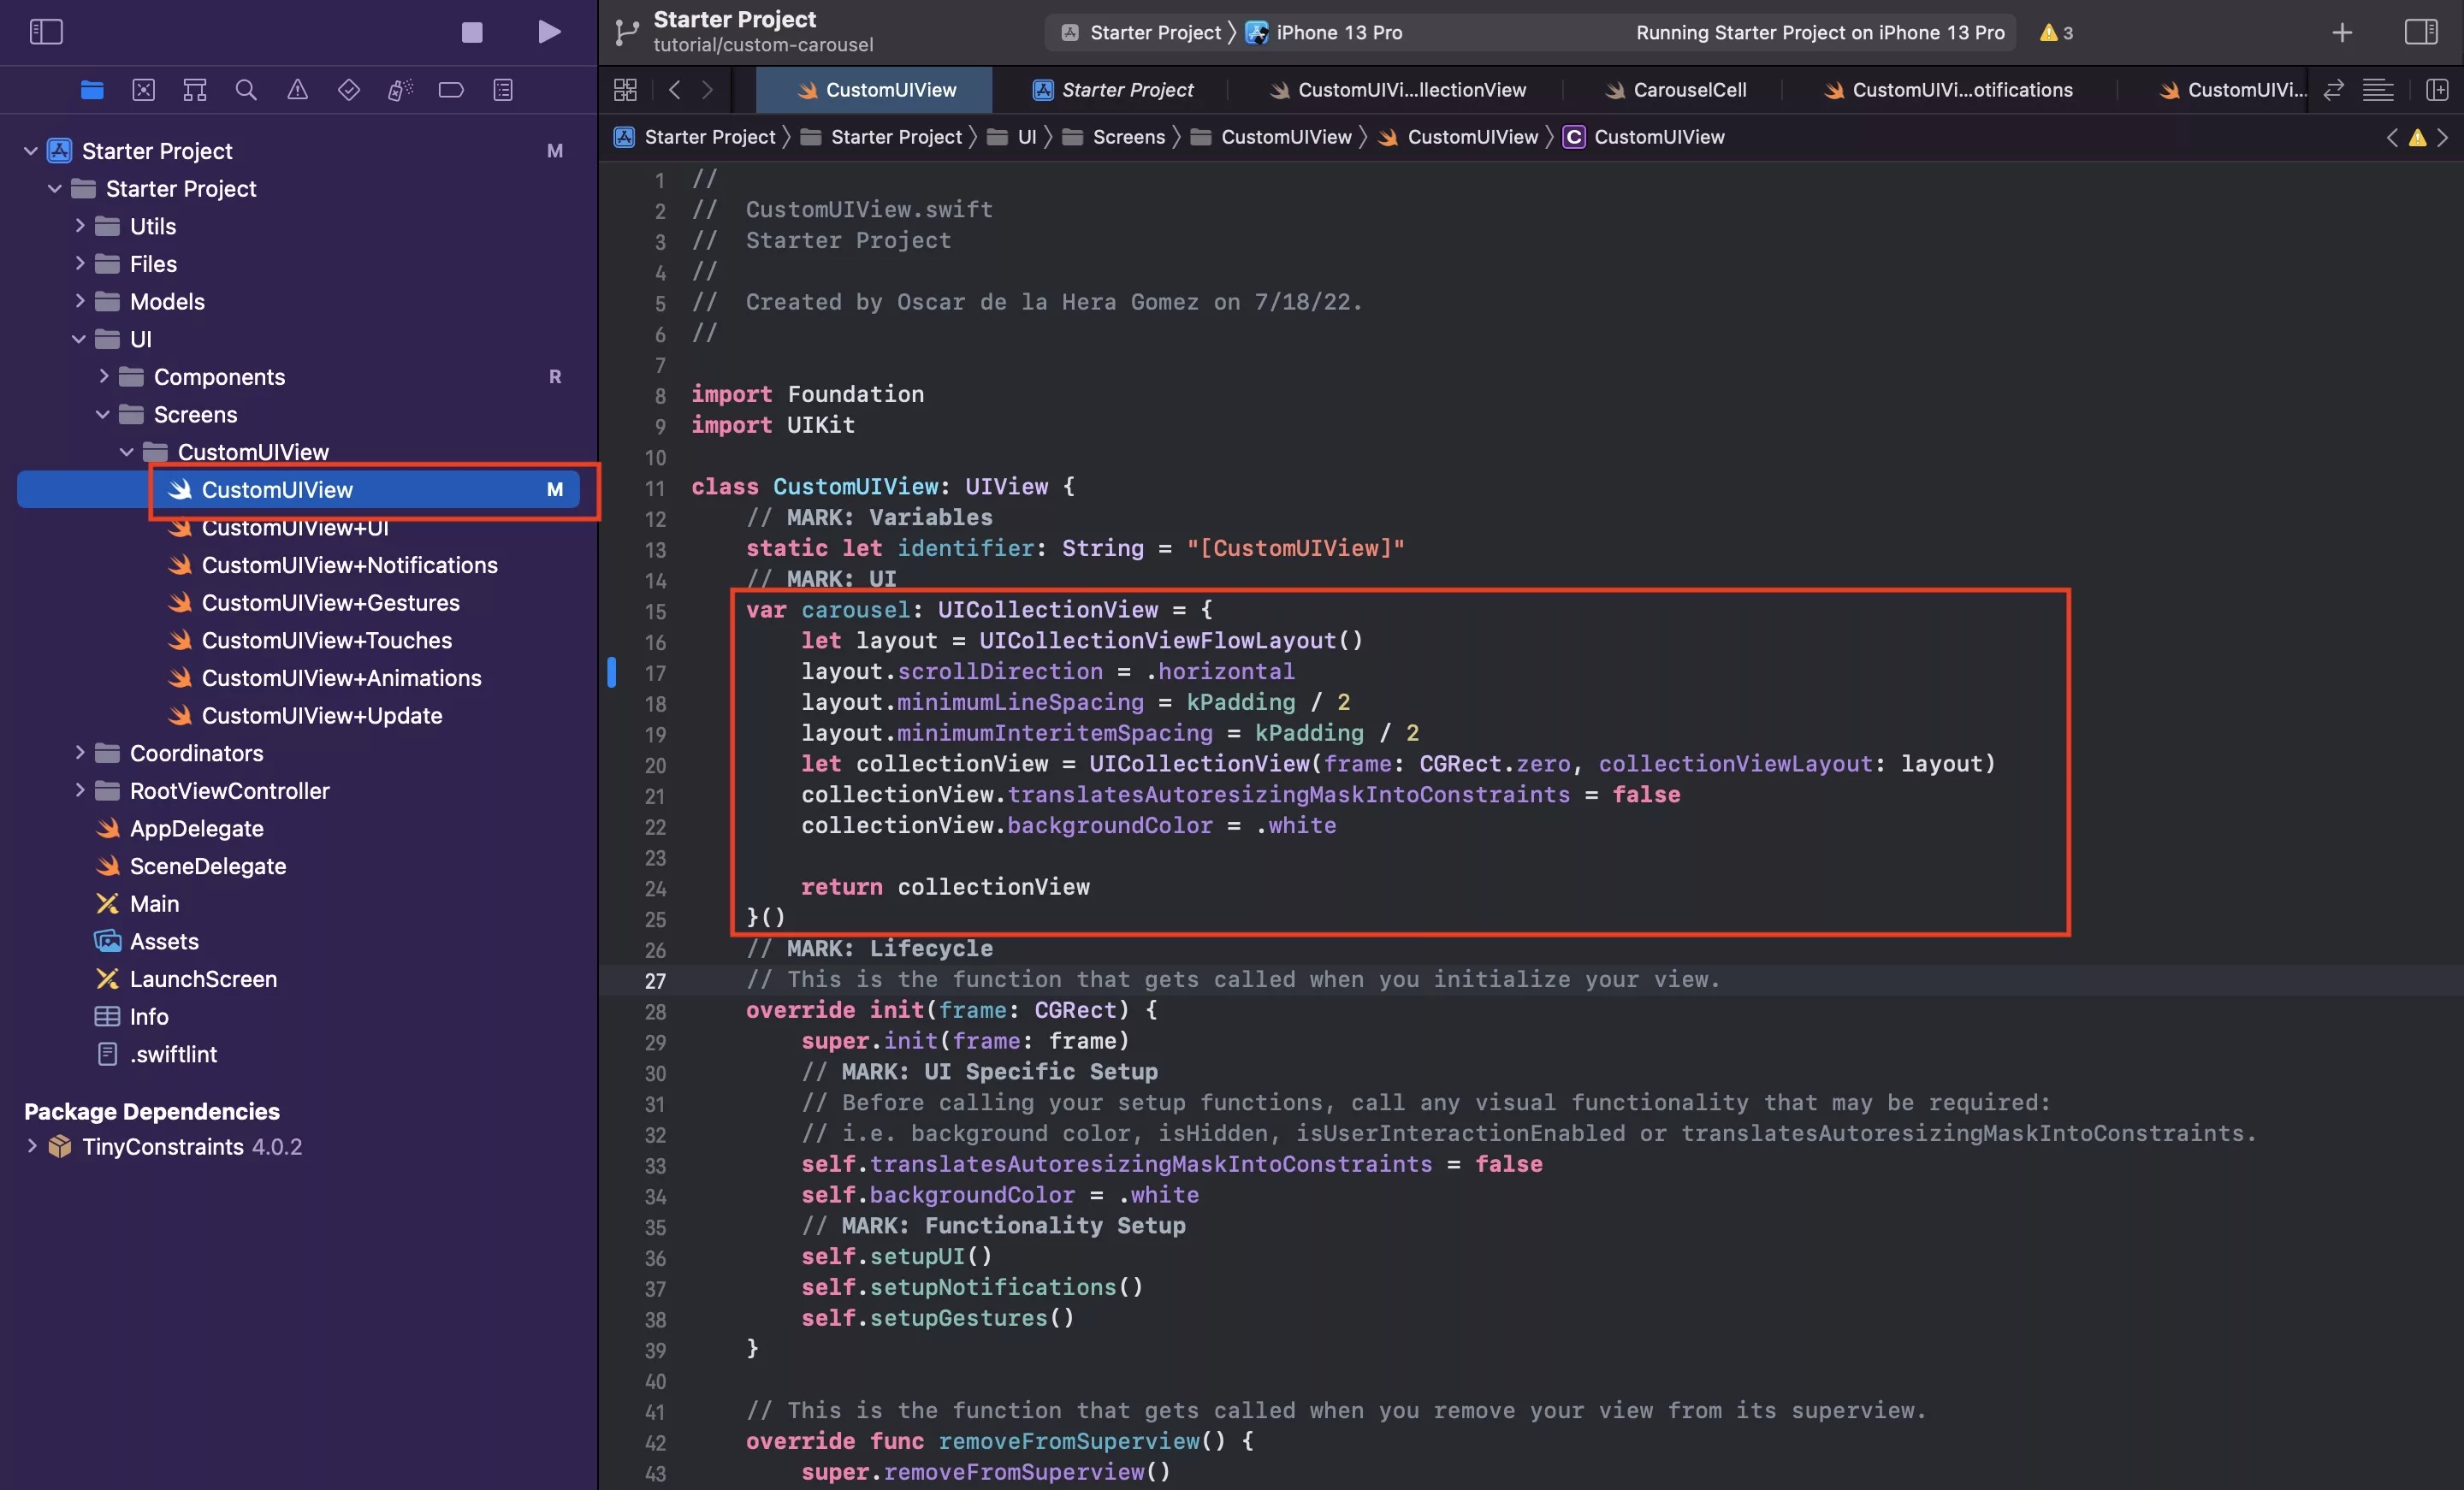 A screenshot showing you how to declare the carousel in Xcode, Swift and iOS.